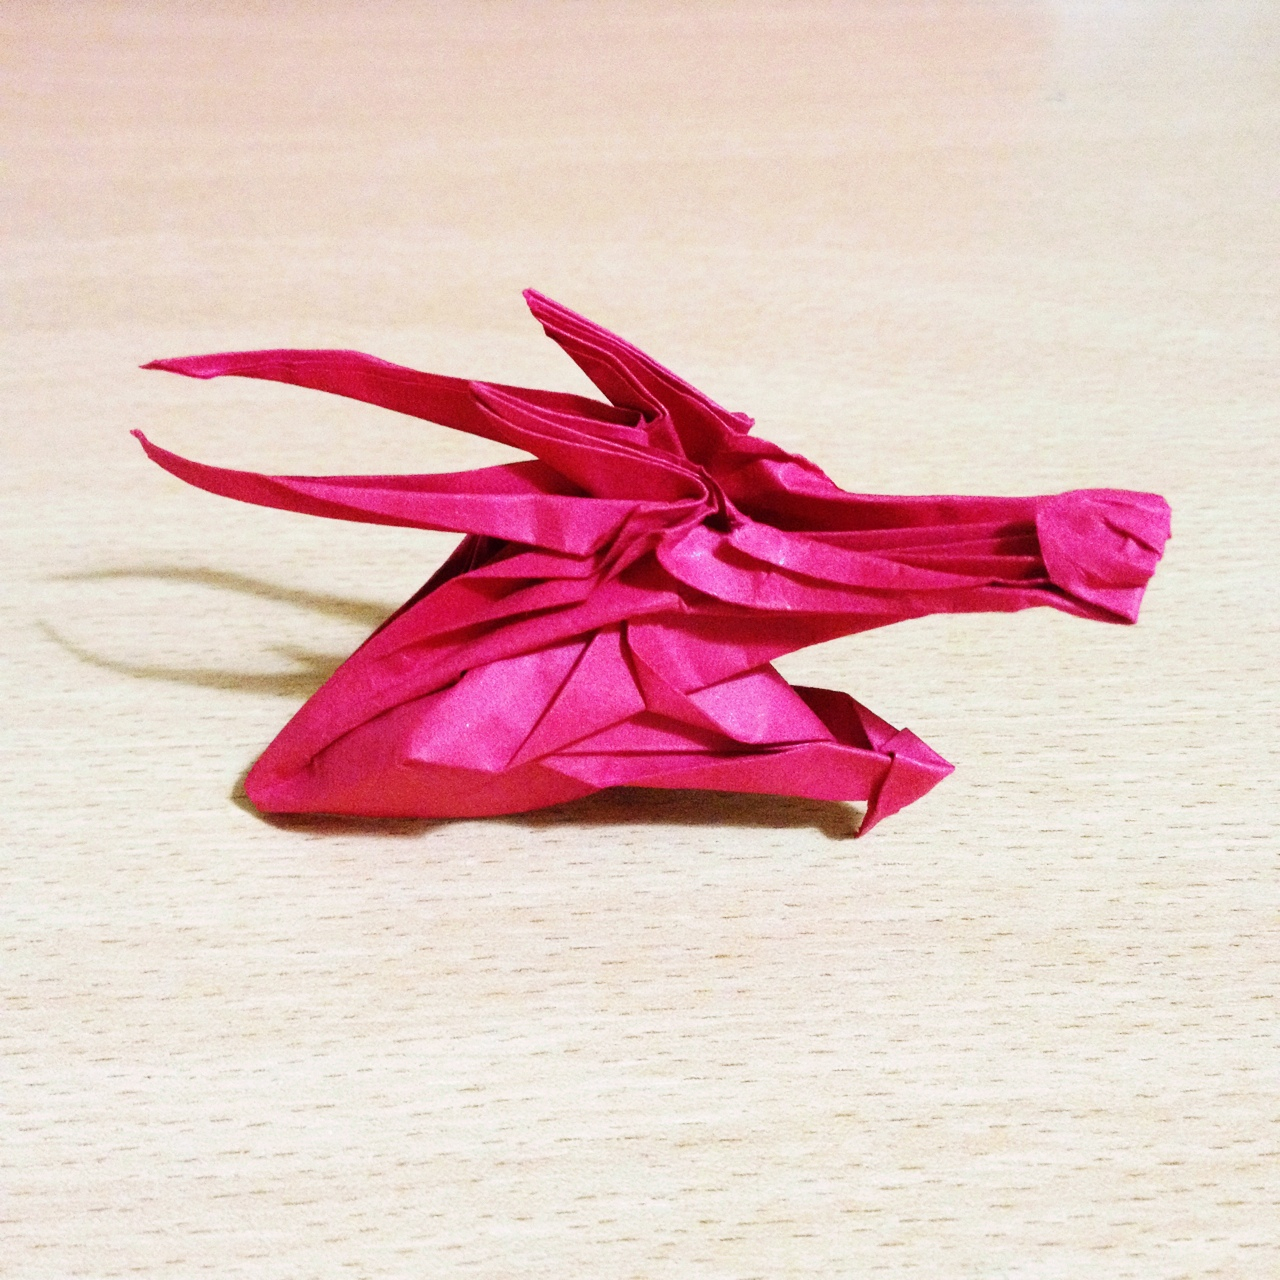 Origami Dragon Head Origami Dragon Head Yes I Know Its Cool It Will Depop